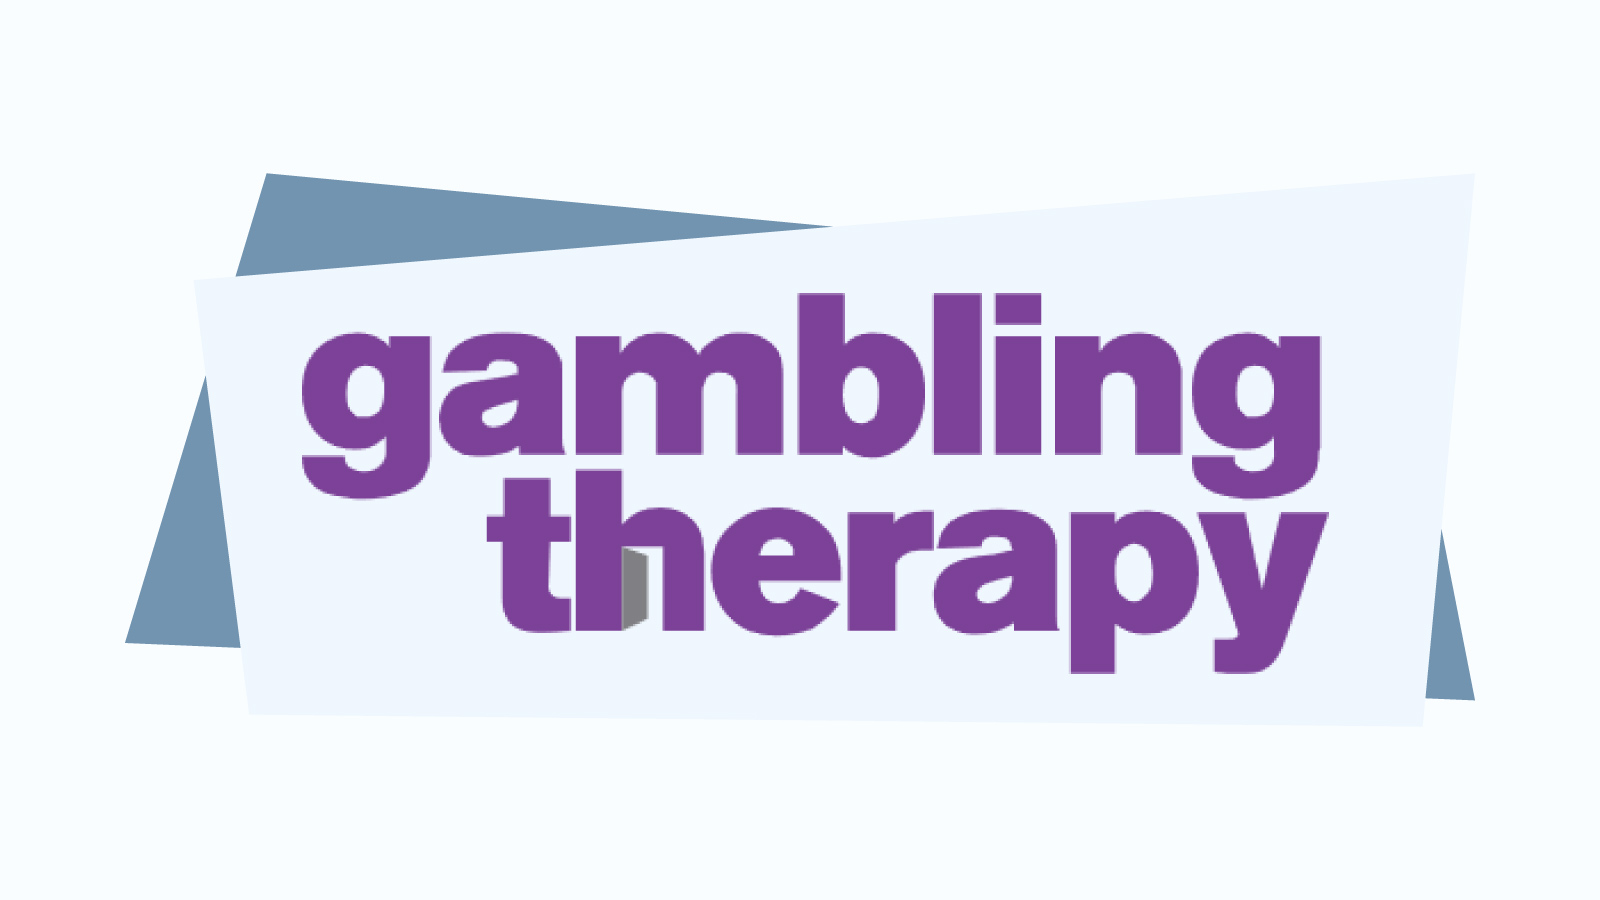 GT - gambling therapy